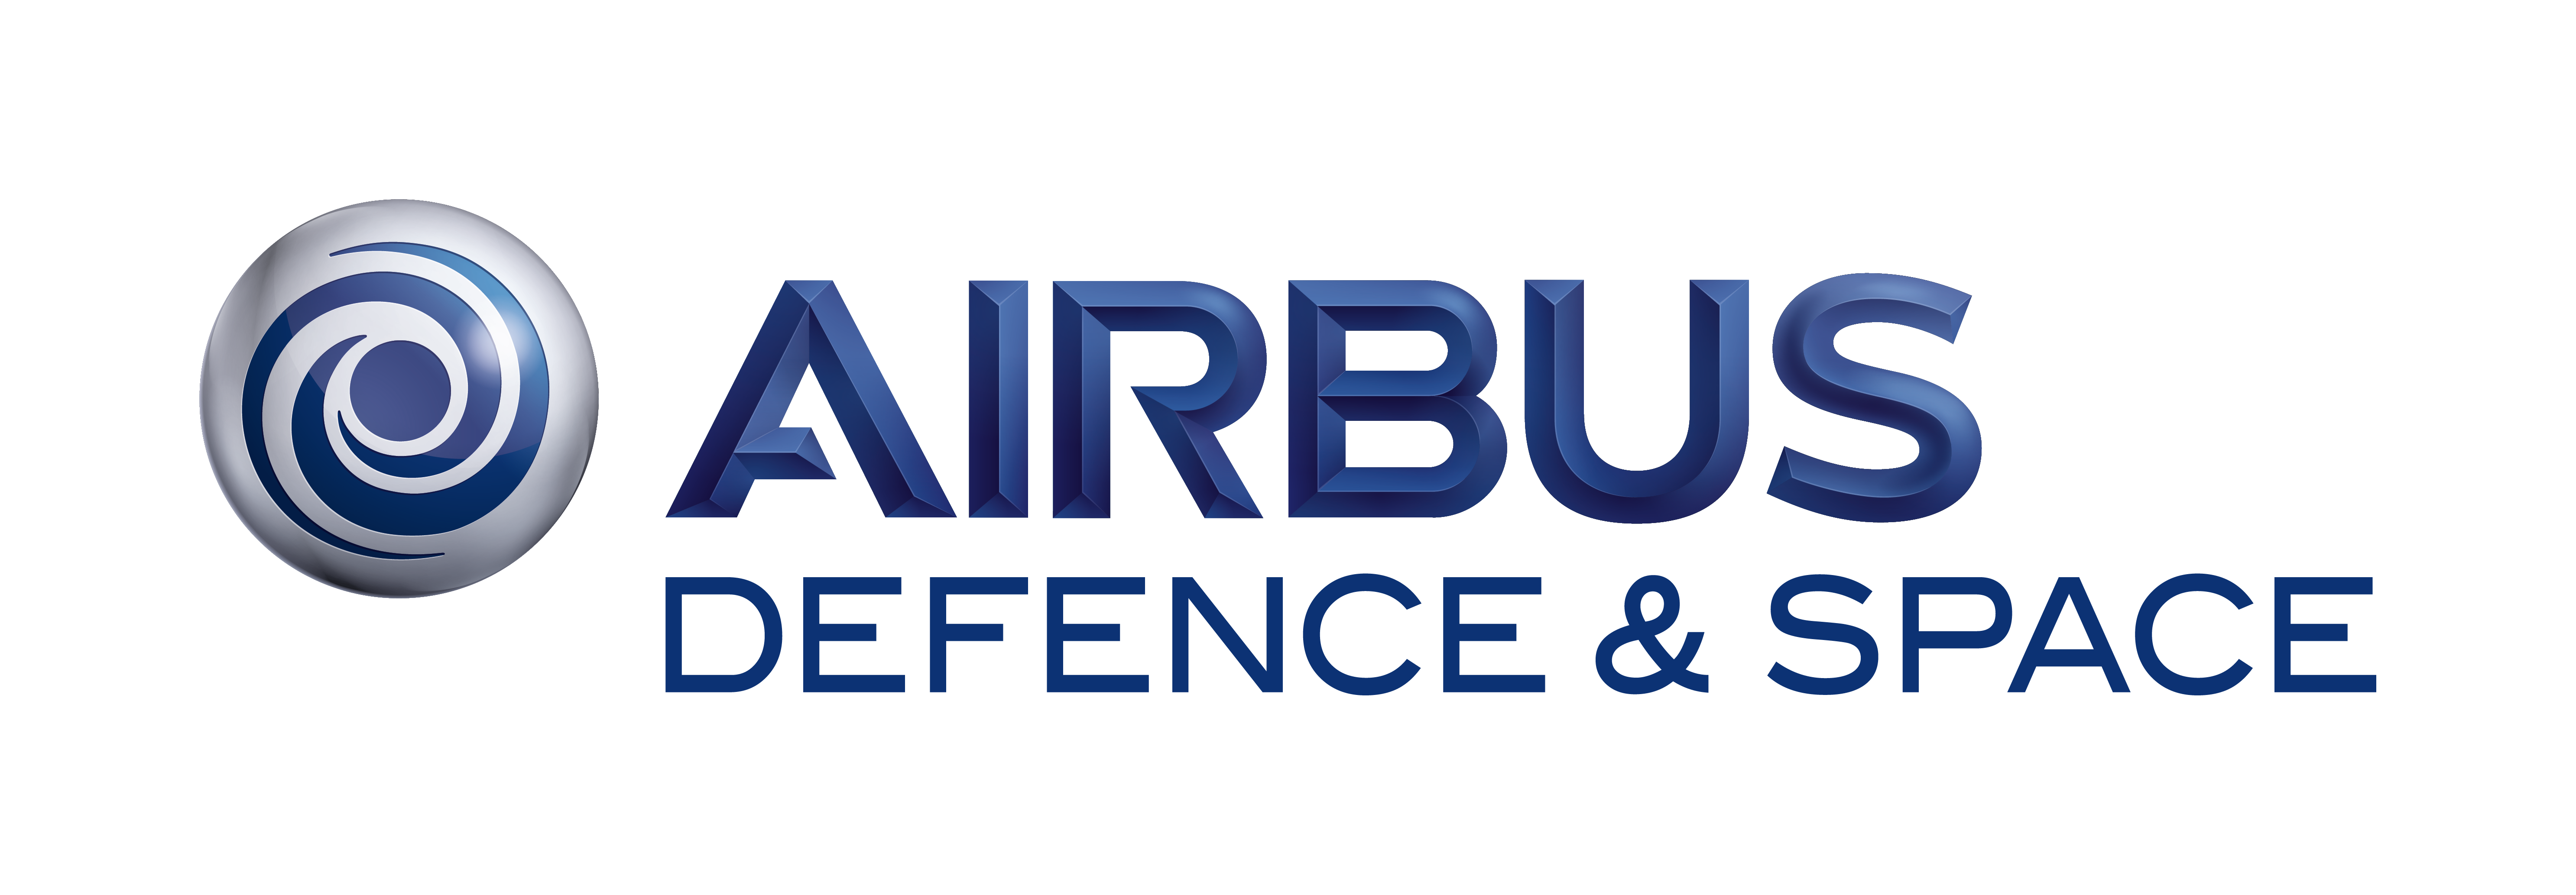 Airbus Defence and Space logo